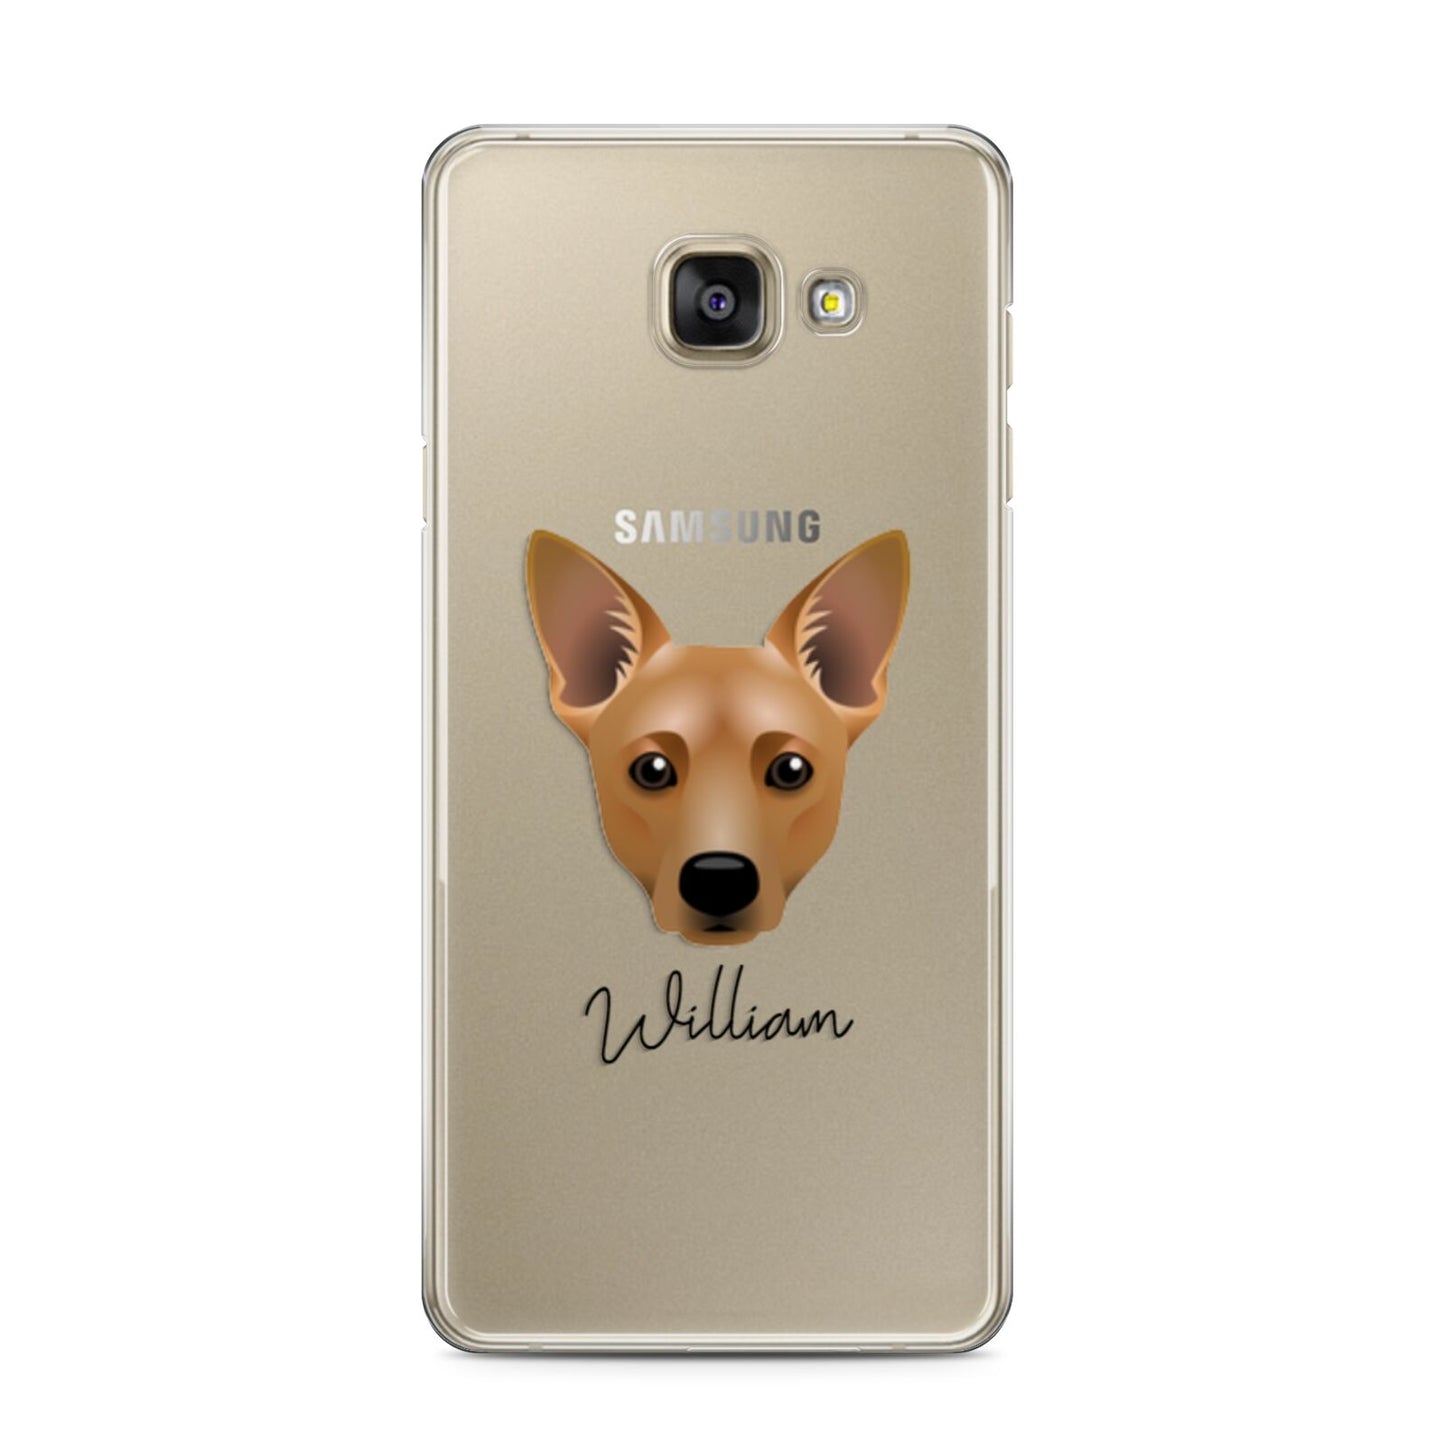 Cojack Personalised Samsung Galaxy A3 2016 Case on gold phone